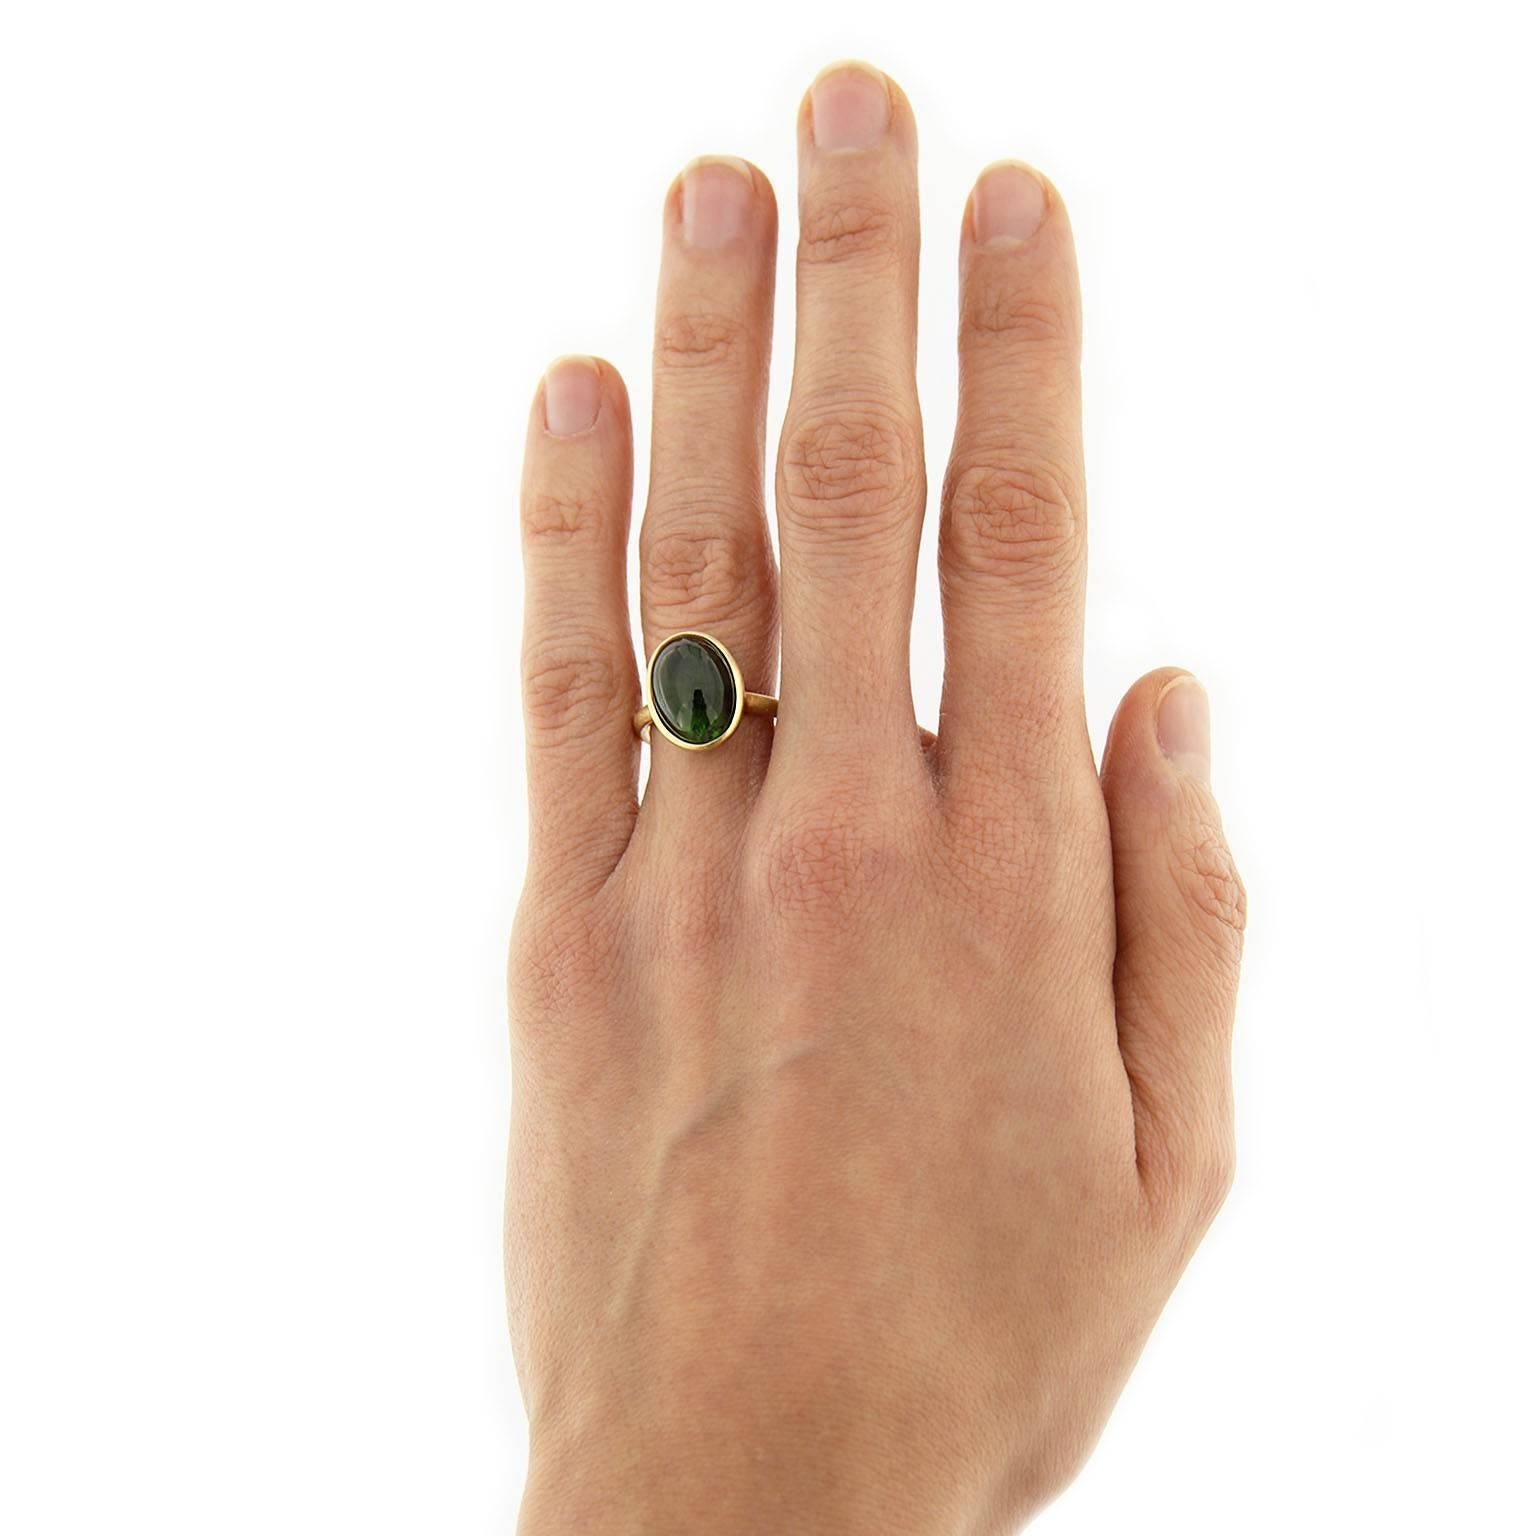 Jona design collection, hand crafted in Italy, 18 karat brushed yellow gold ring, centering a 8.85 carats green cabochon tourmaline. 
US size 5.9. It can be sized to any specification.  
All Jona jewelry is new and has never been previously owned or